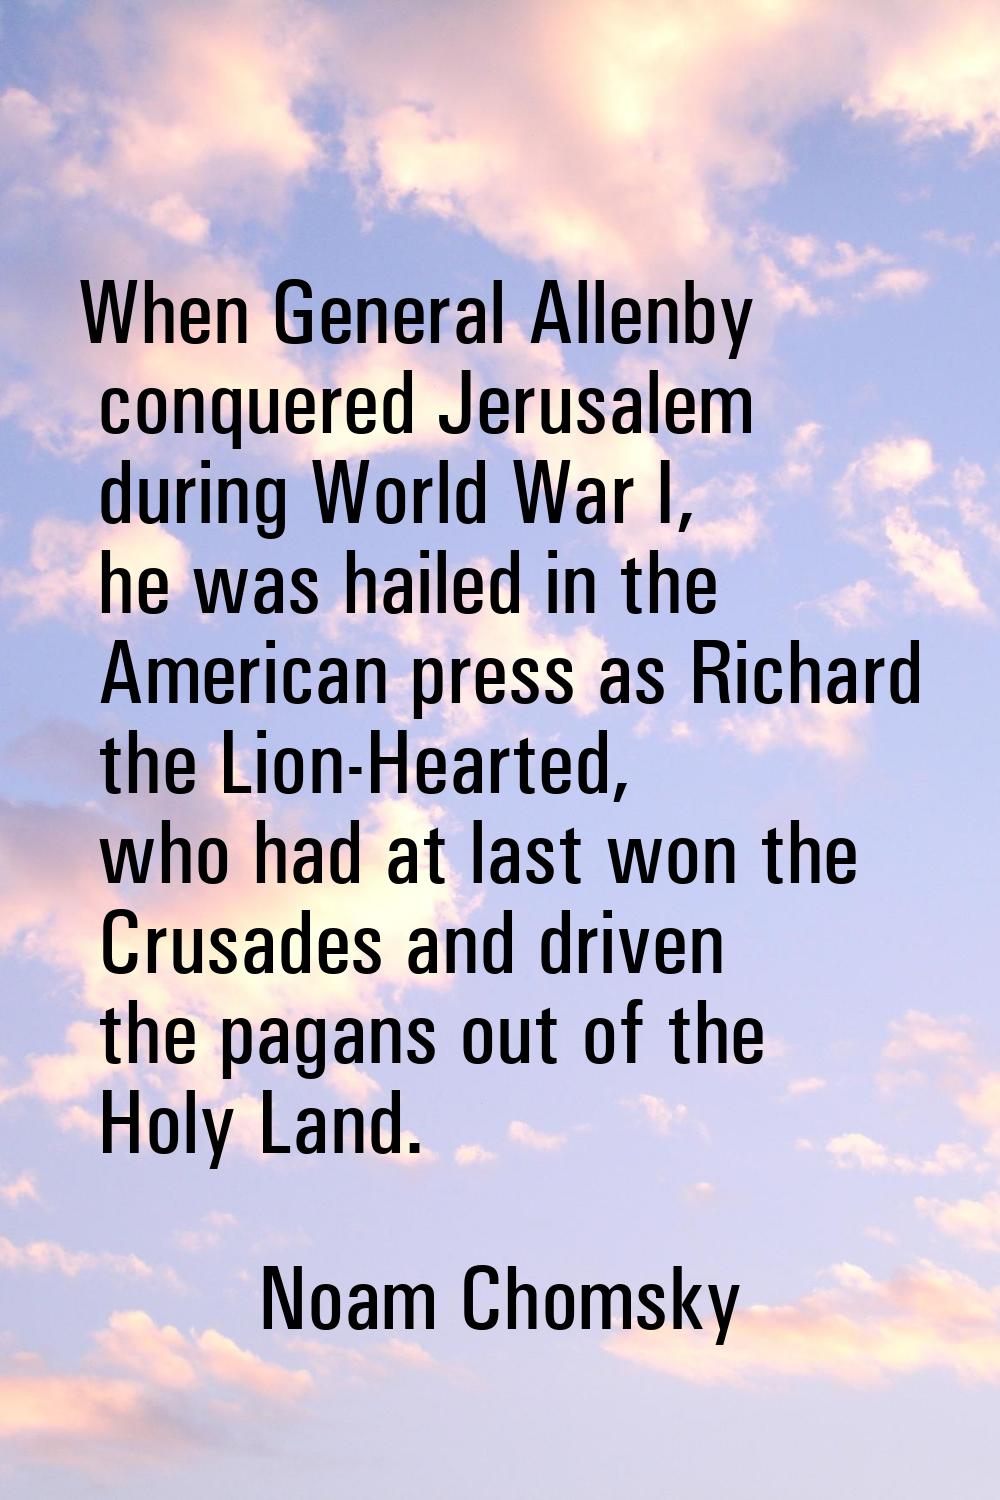 When General Allenby conquered Jerusalem during World War I, he was hailed in the American press as